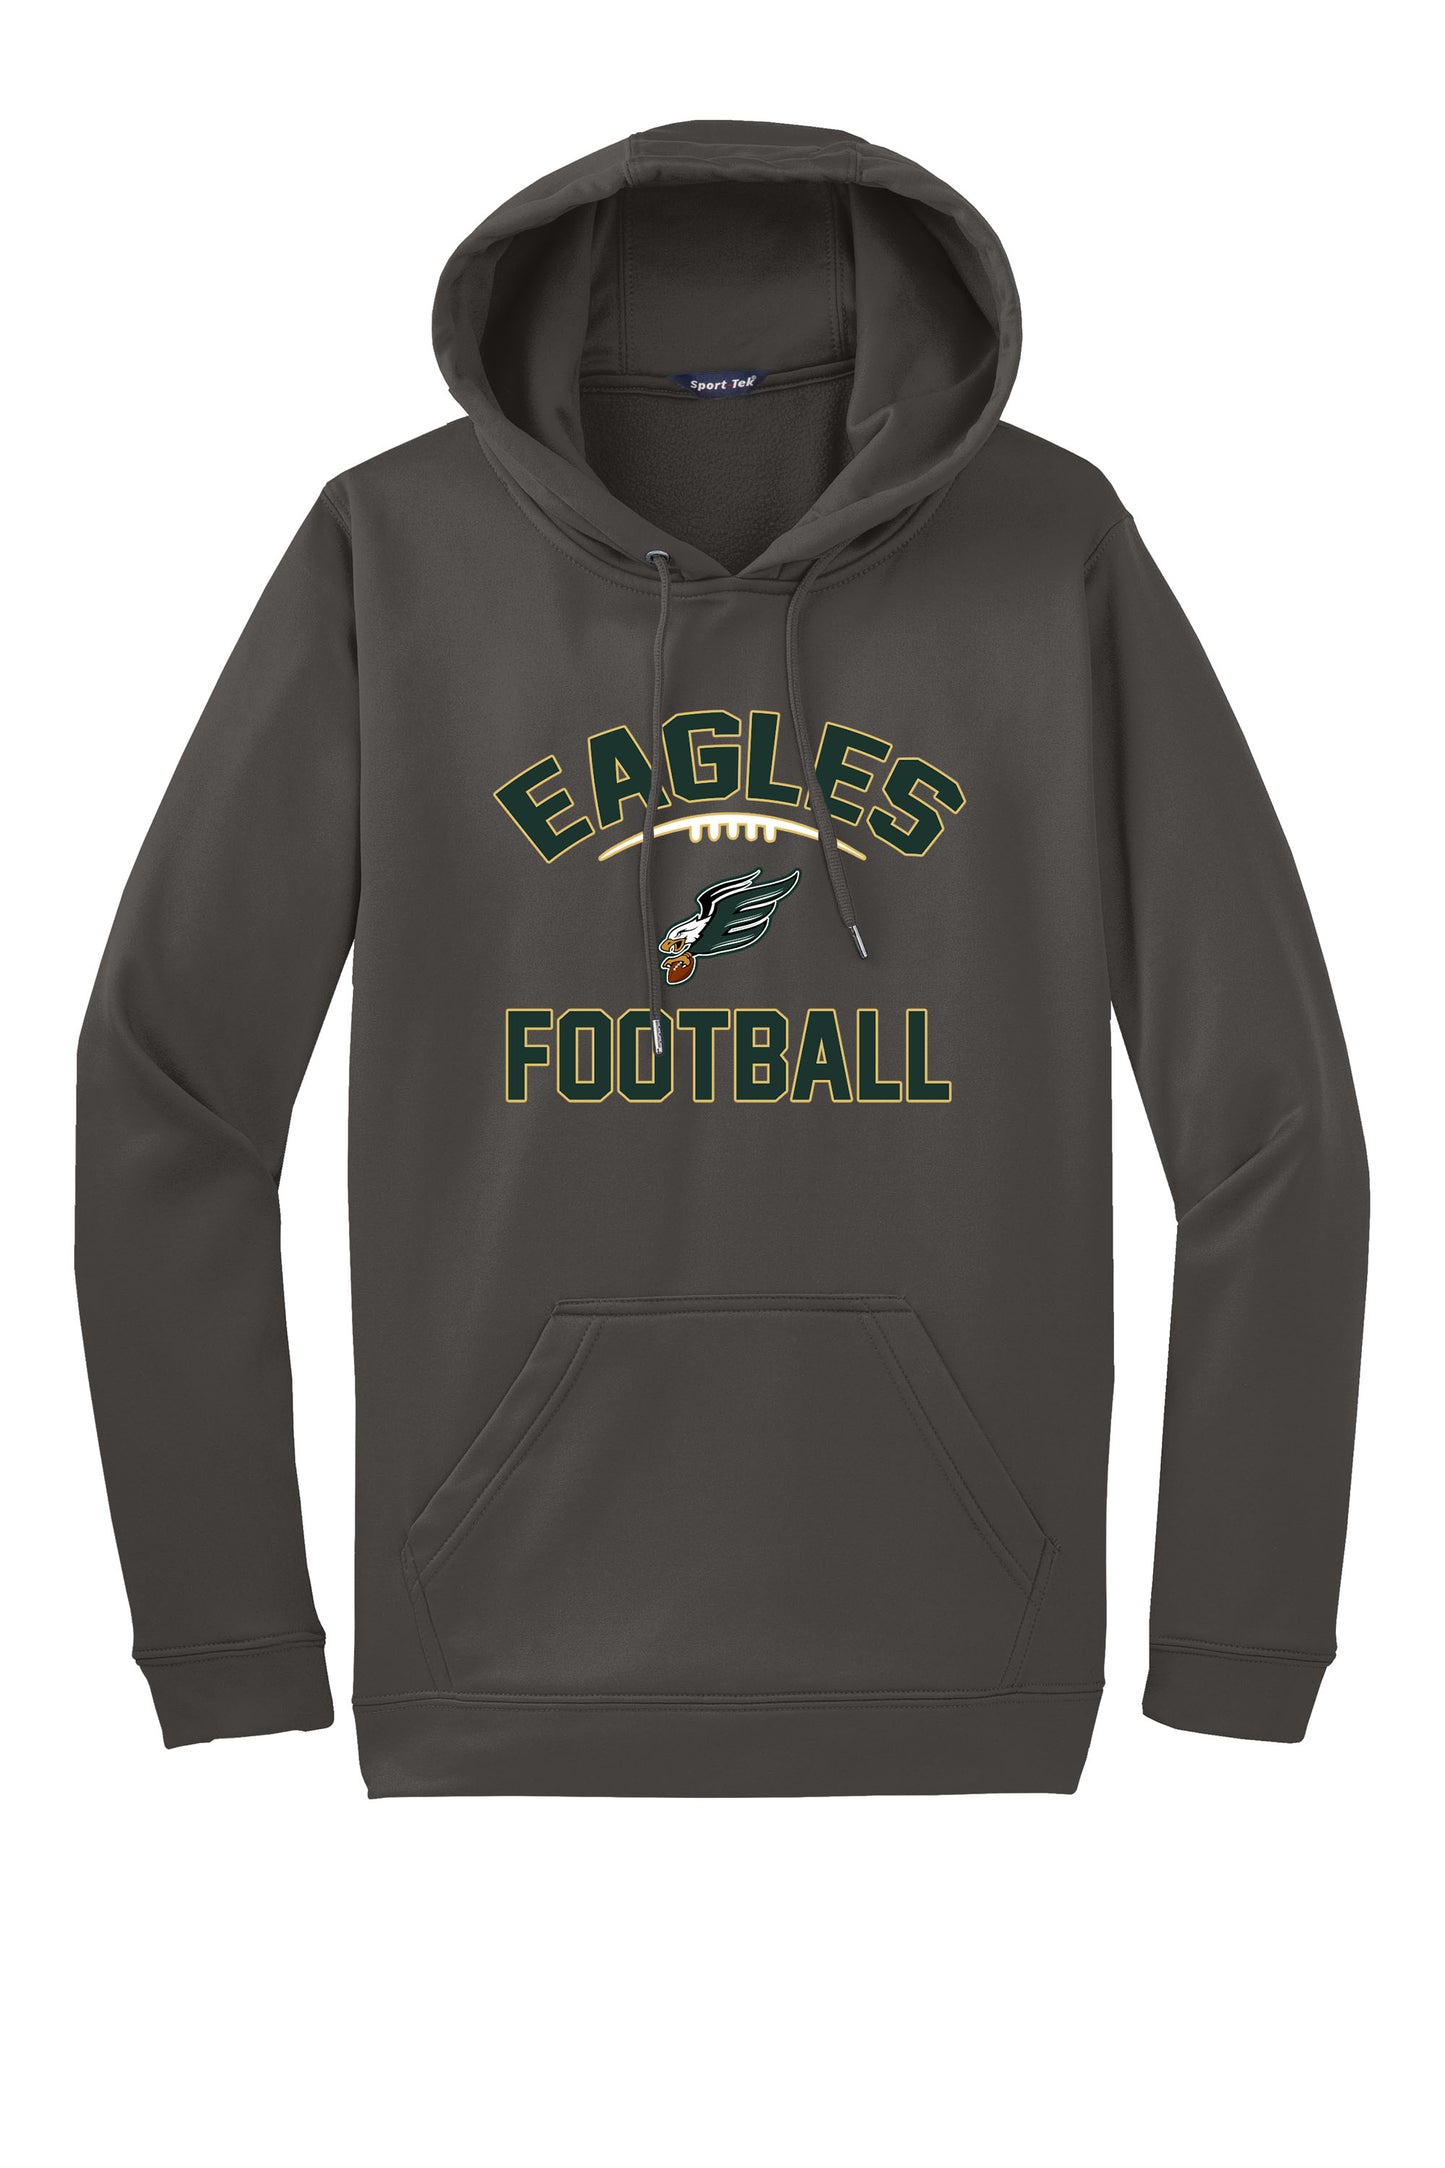 Enfield Eagles Football Adult Fleece Hoodie "Classic" - F244 (color options available)